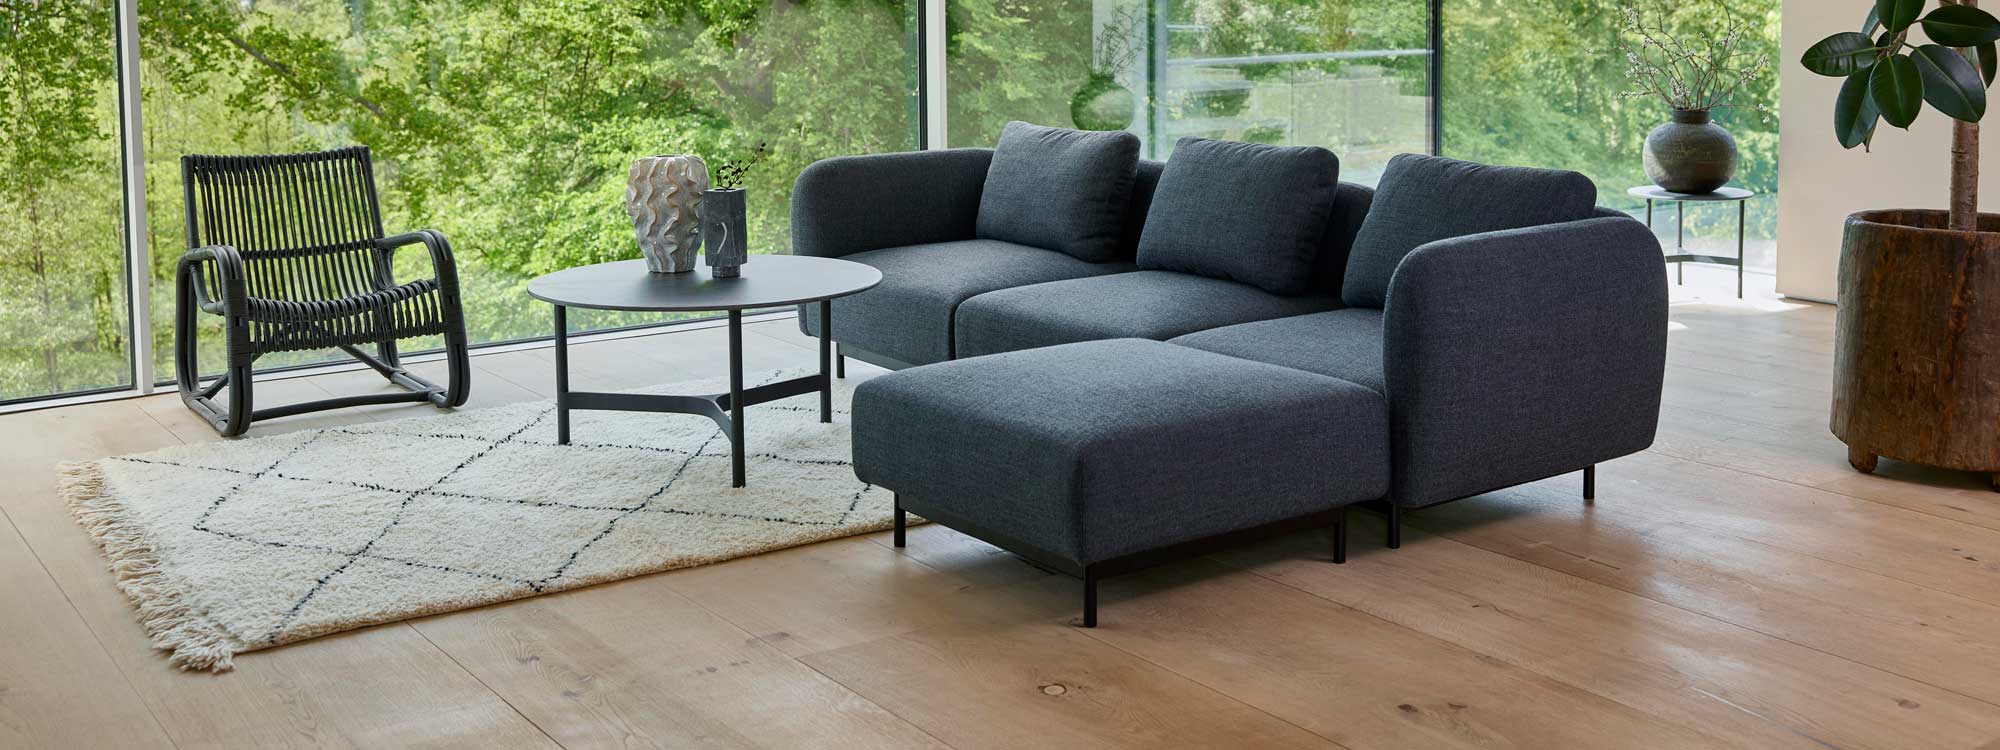 Image of Aura modern sofa and footrest in dark-grey Cane-line Ambiance fabric, with Twist circular ceramic coffee table in the centre